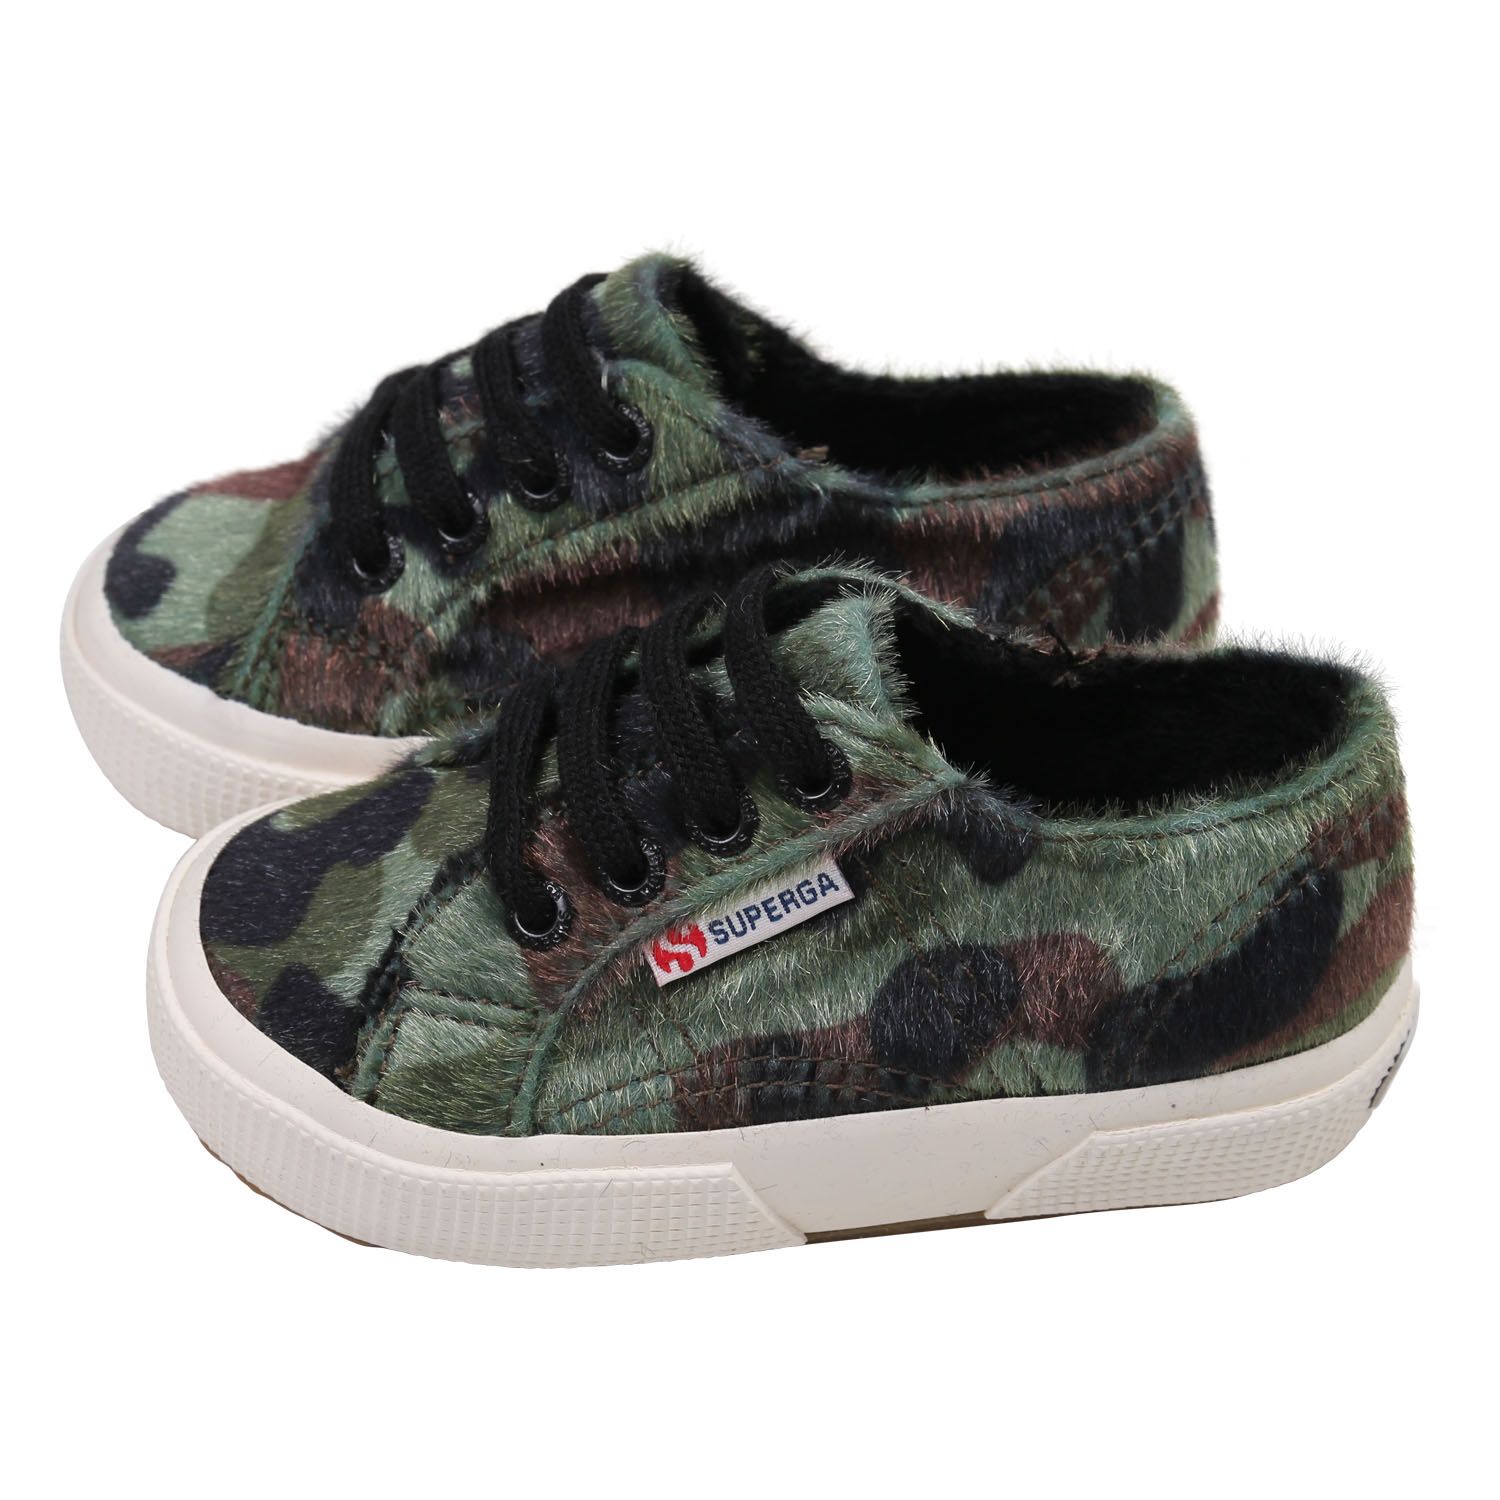 Superga green shoe - Shoe details with upper in camouflage print synthetic leather, microfleece lining and vulcanized natural rubber sole